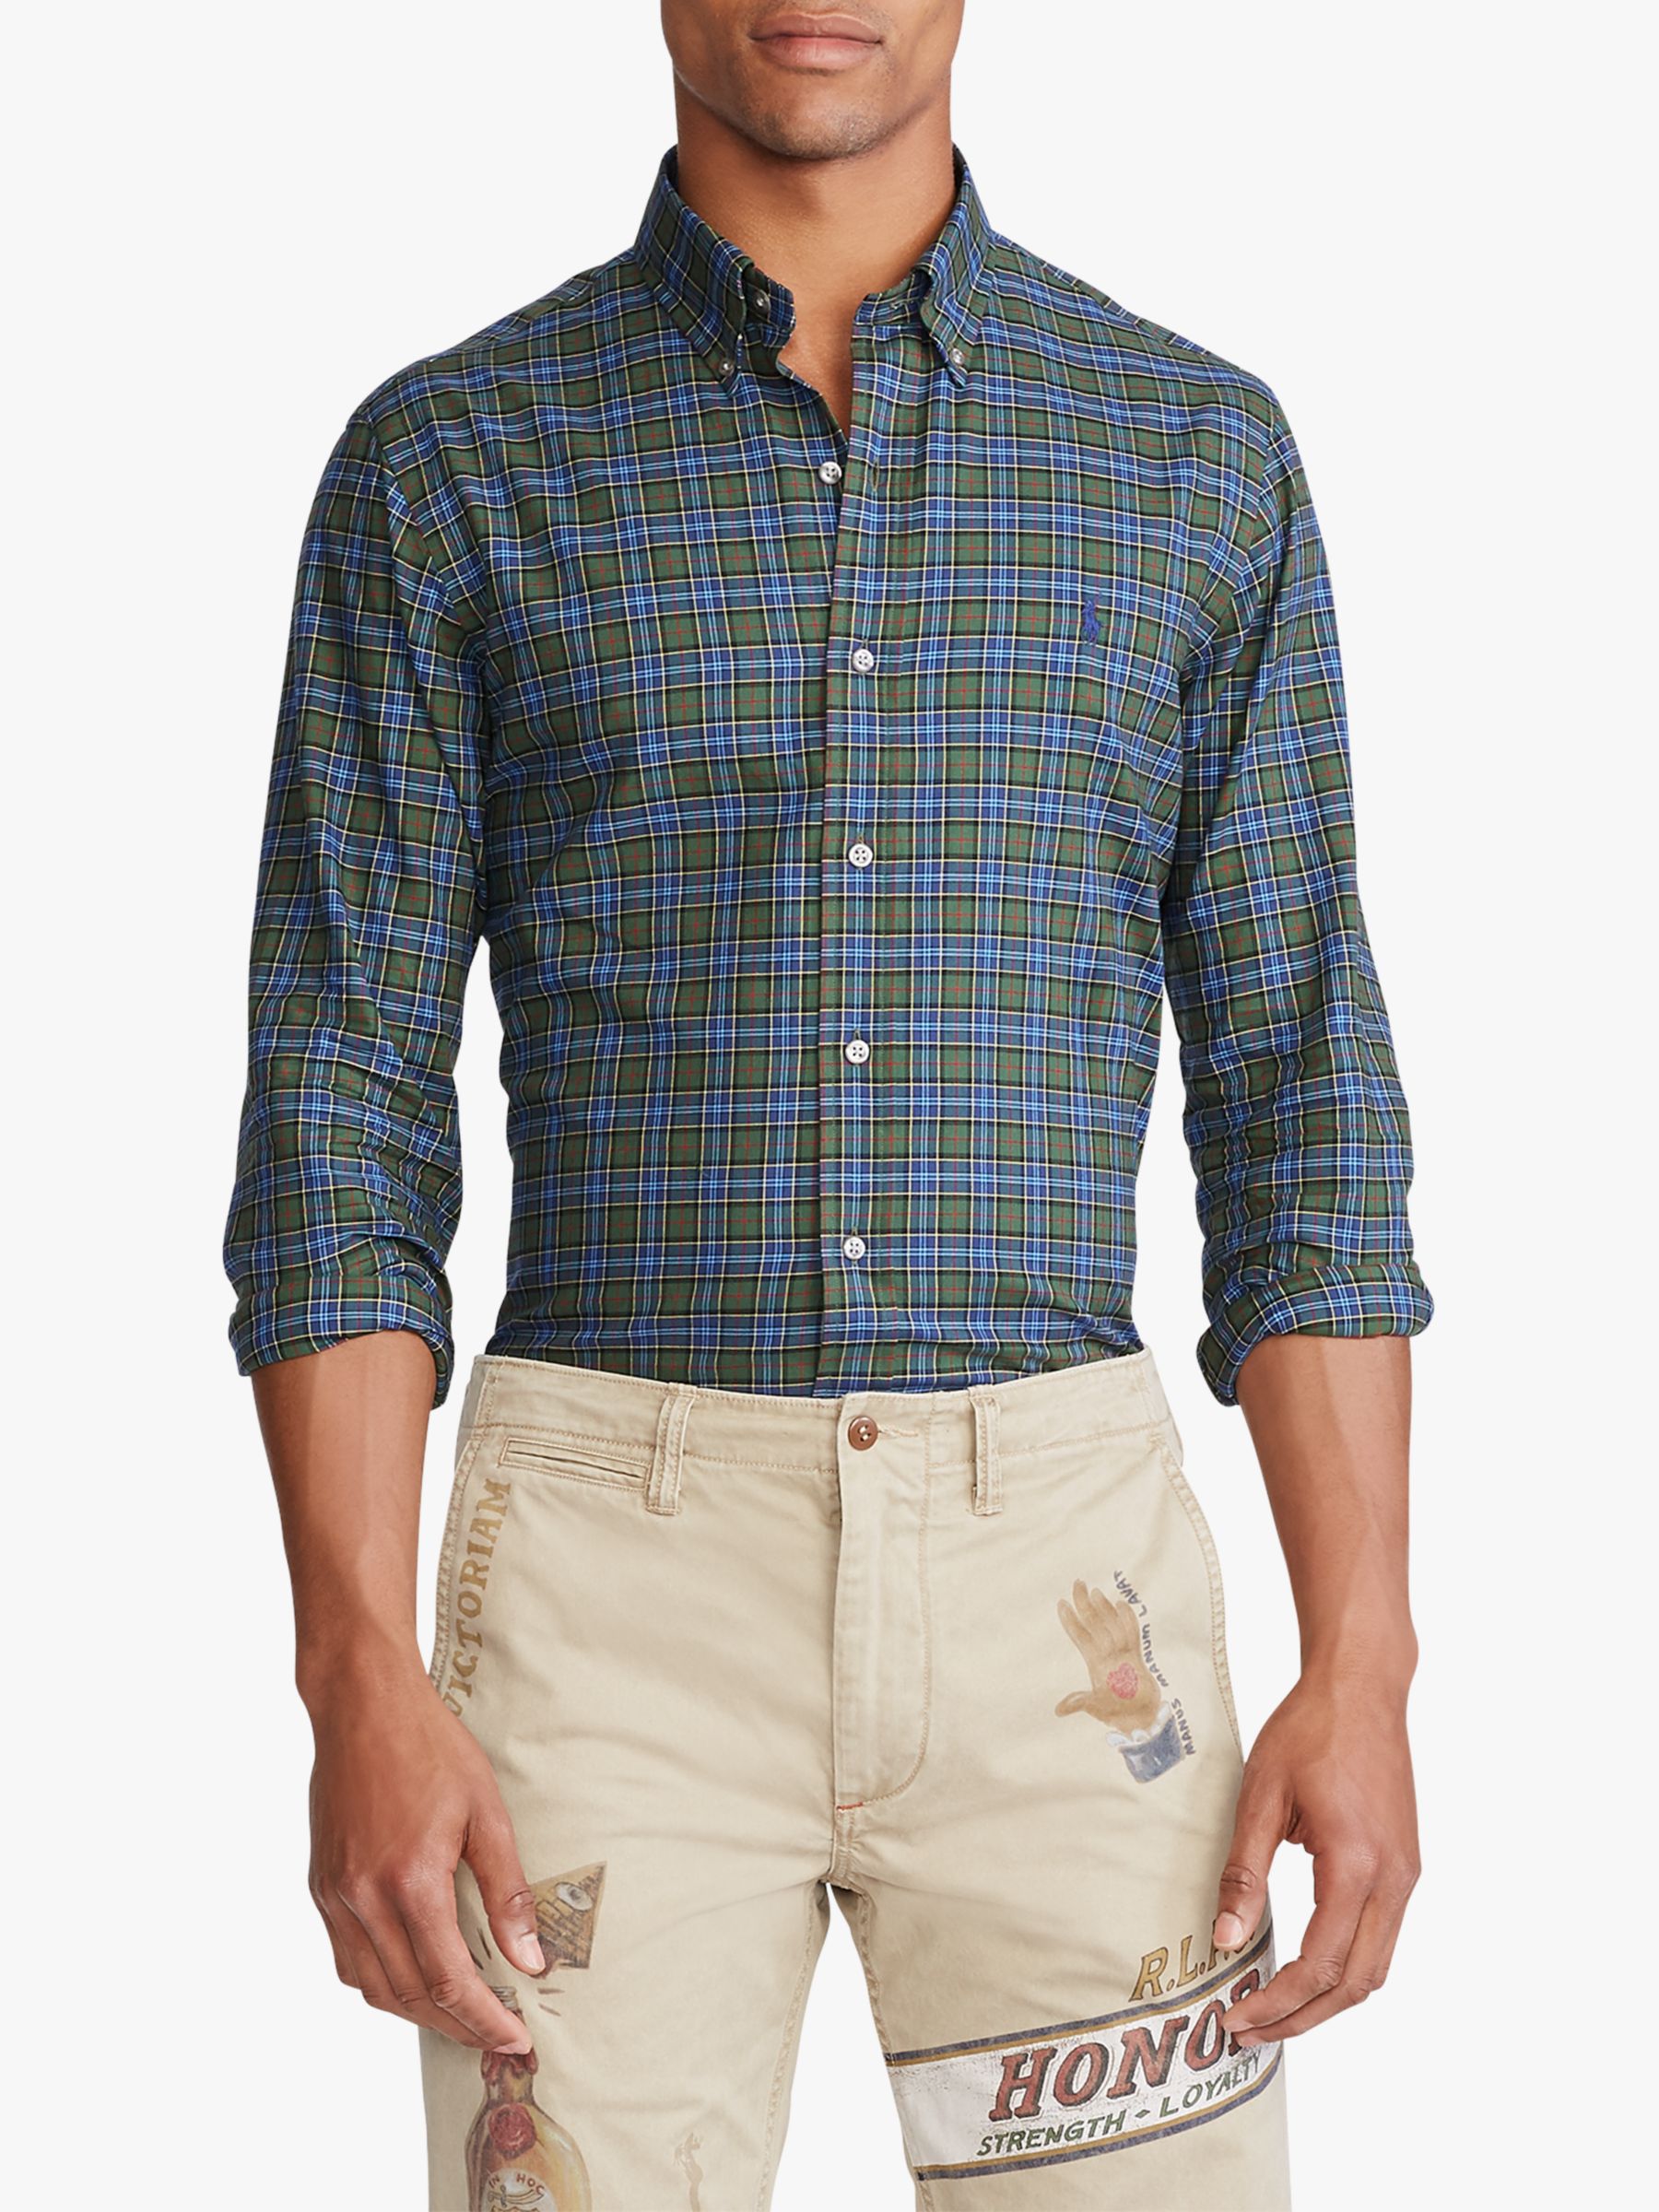 Polo Ralph Lauren Custom Fit Plaid Oxford Shirt, Olive/Navy/Multi at ...